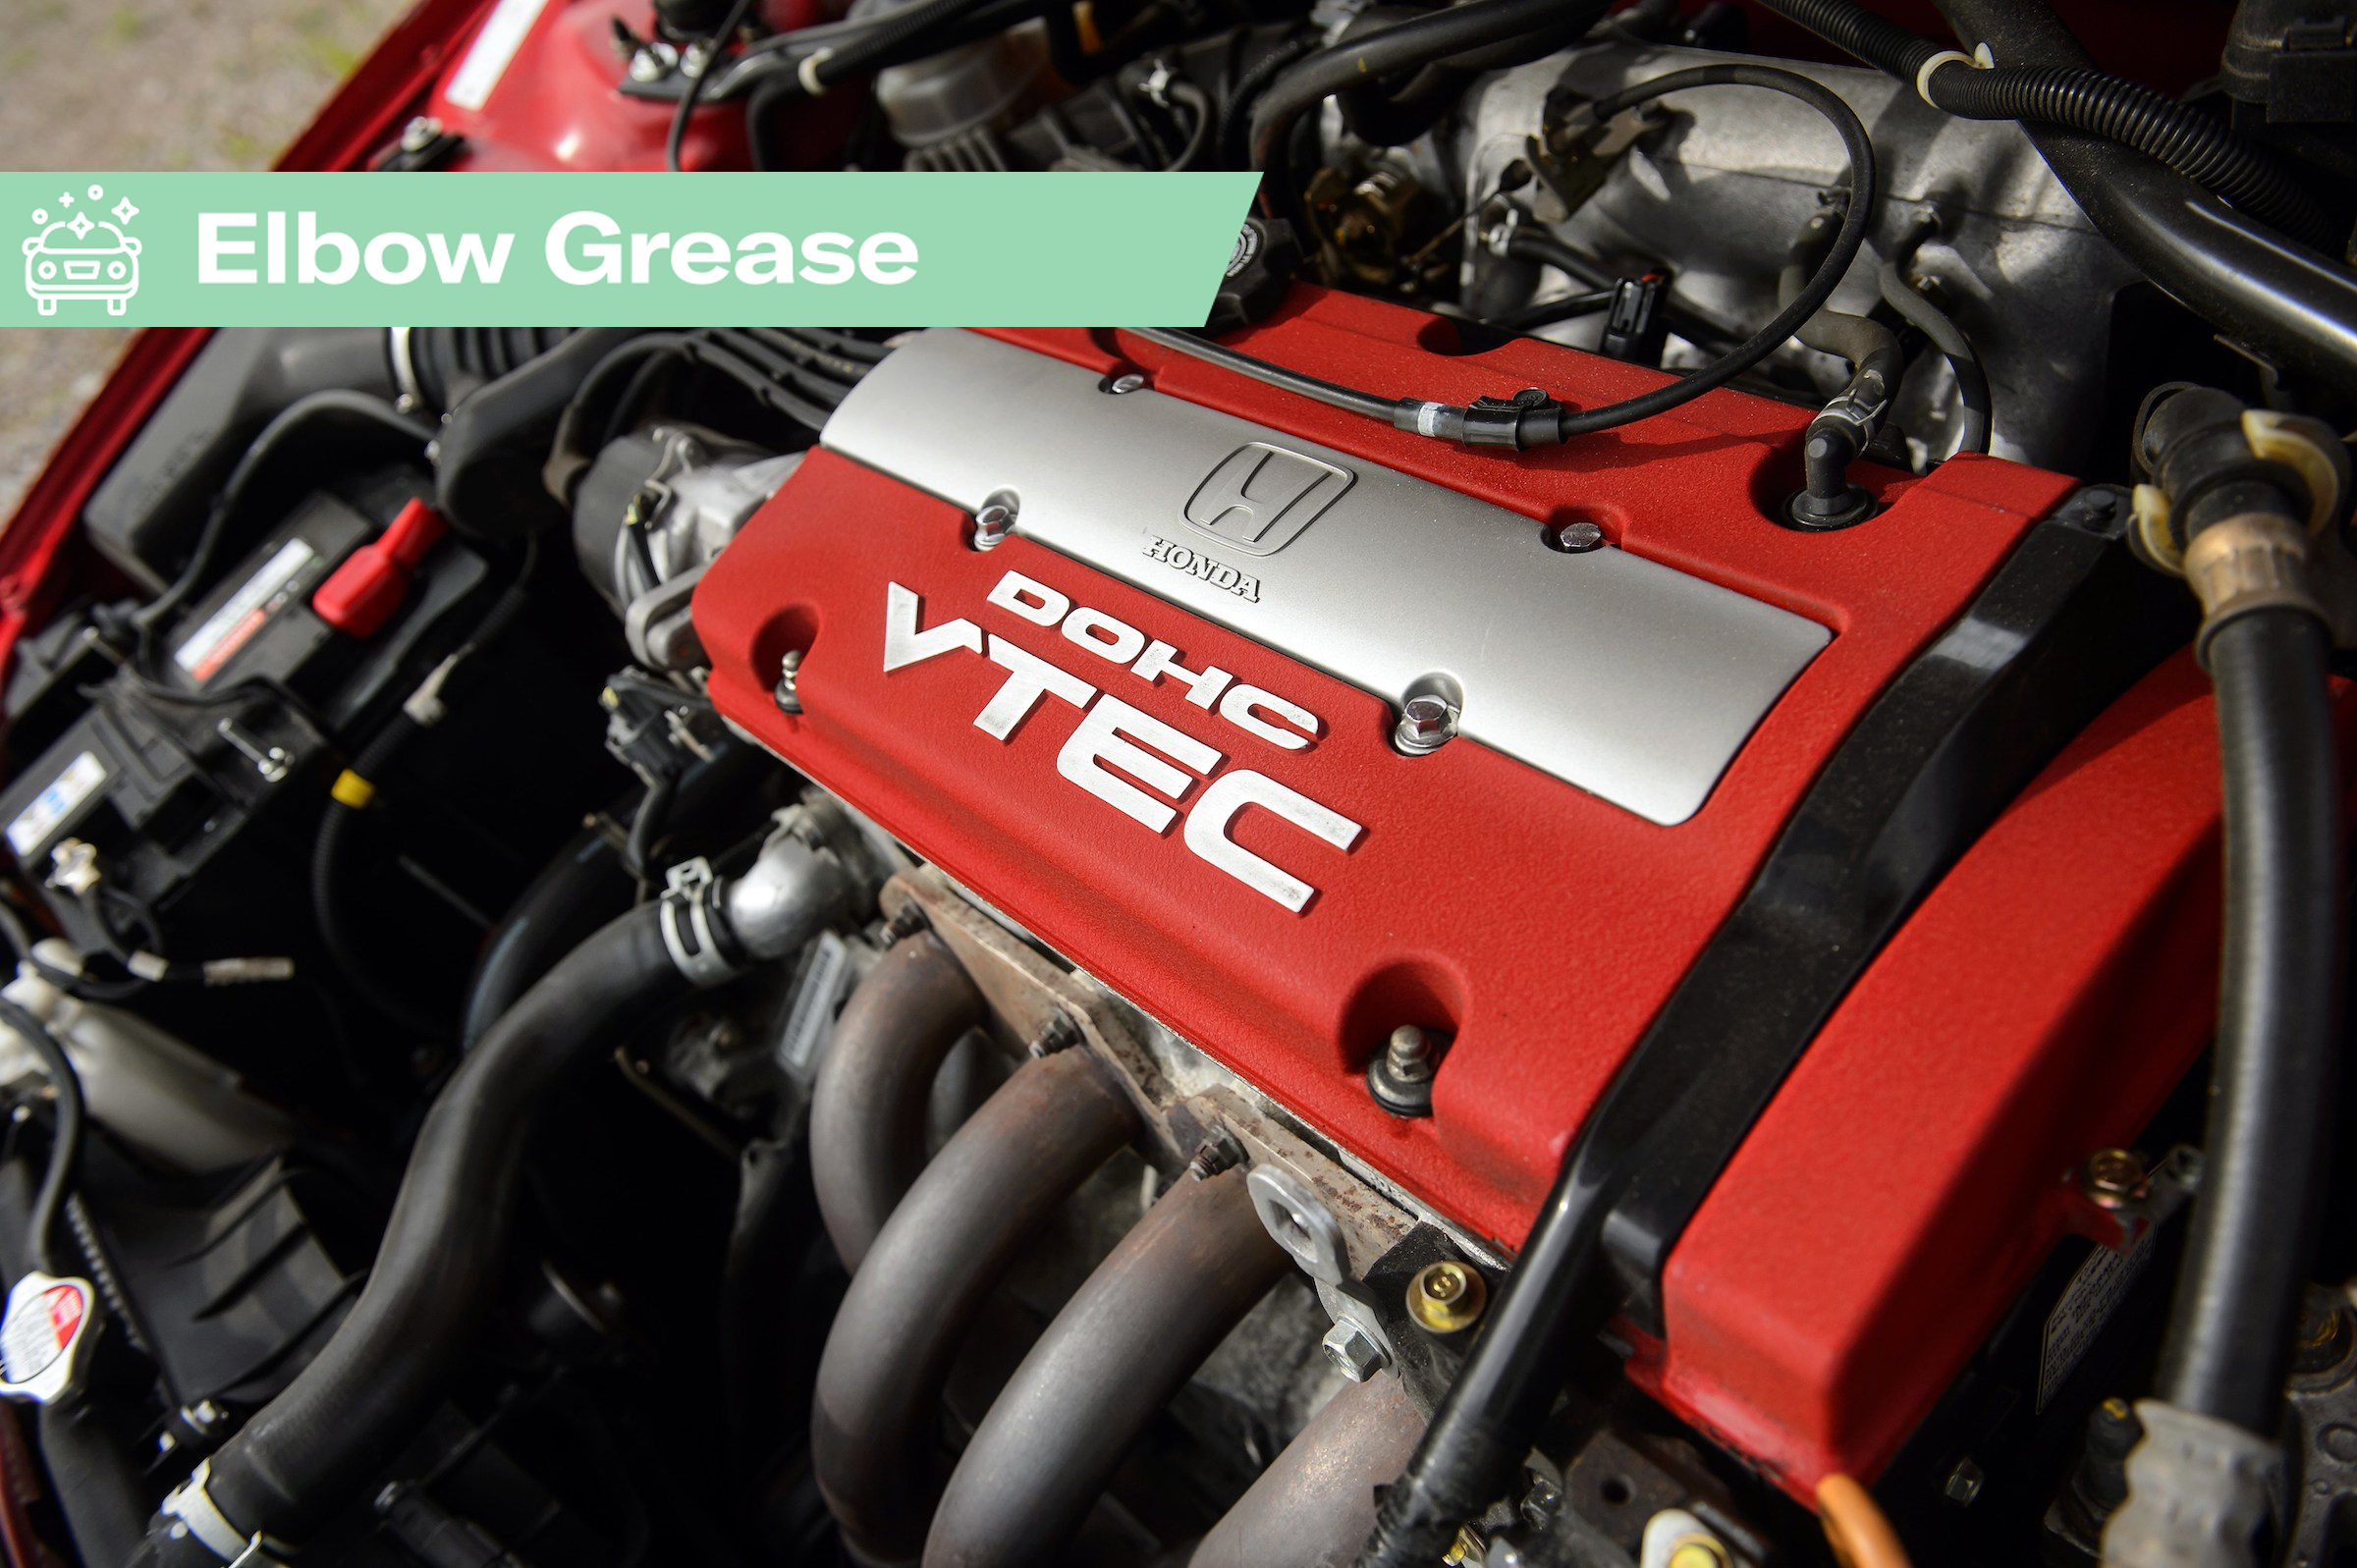 Elbow Grease: Cleaning your engine bay, and what to look out for